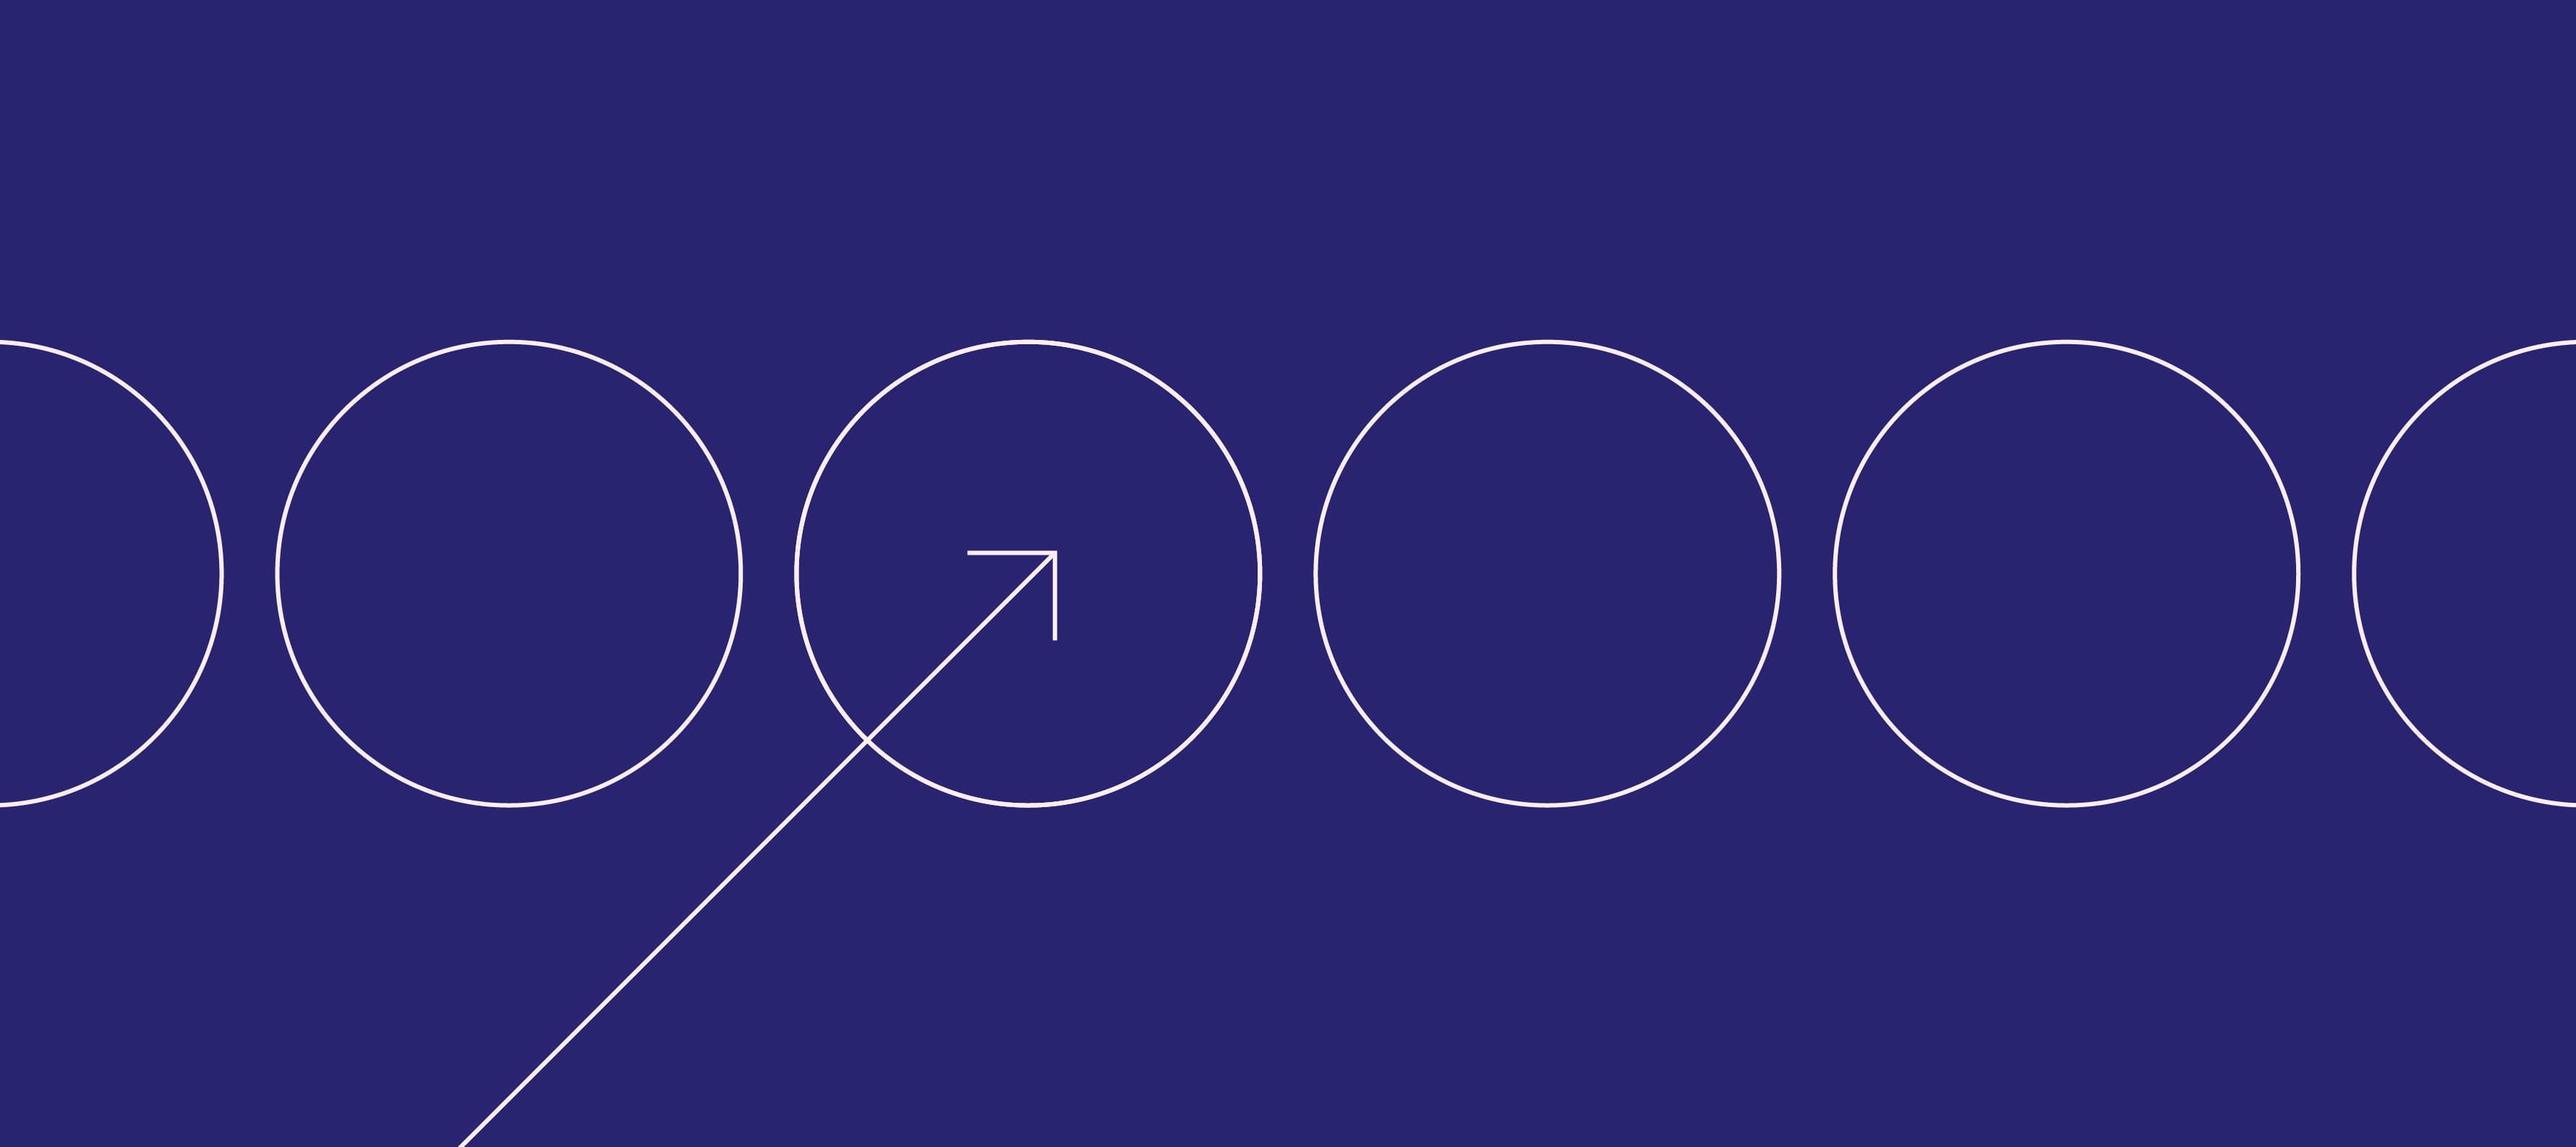 A series of white circles are evenly spaced in a horizontal line against a dark blue background. One circle to the left has an upward right diagonal arrow extending from its center, pointing towards the next circle.